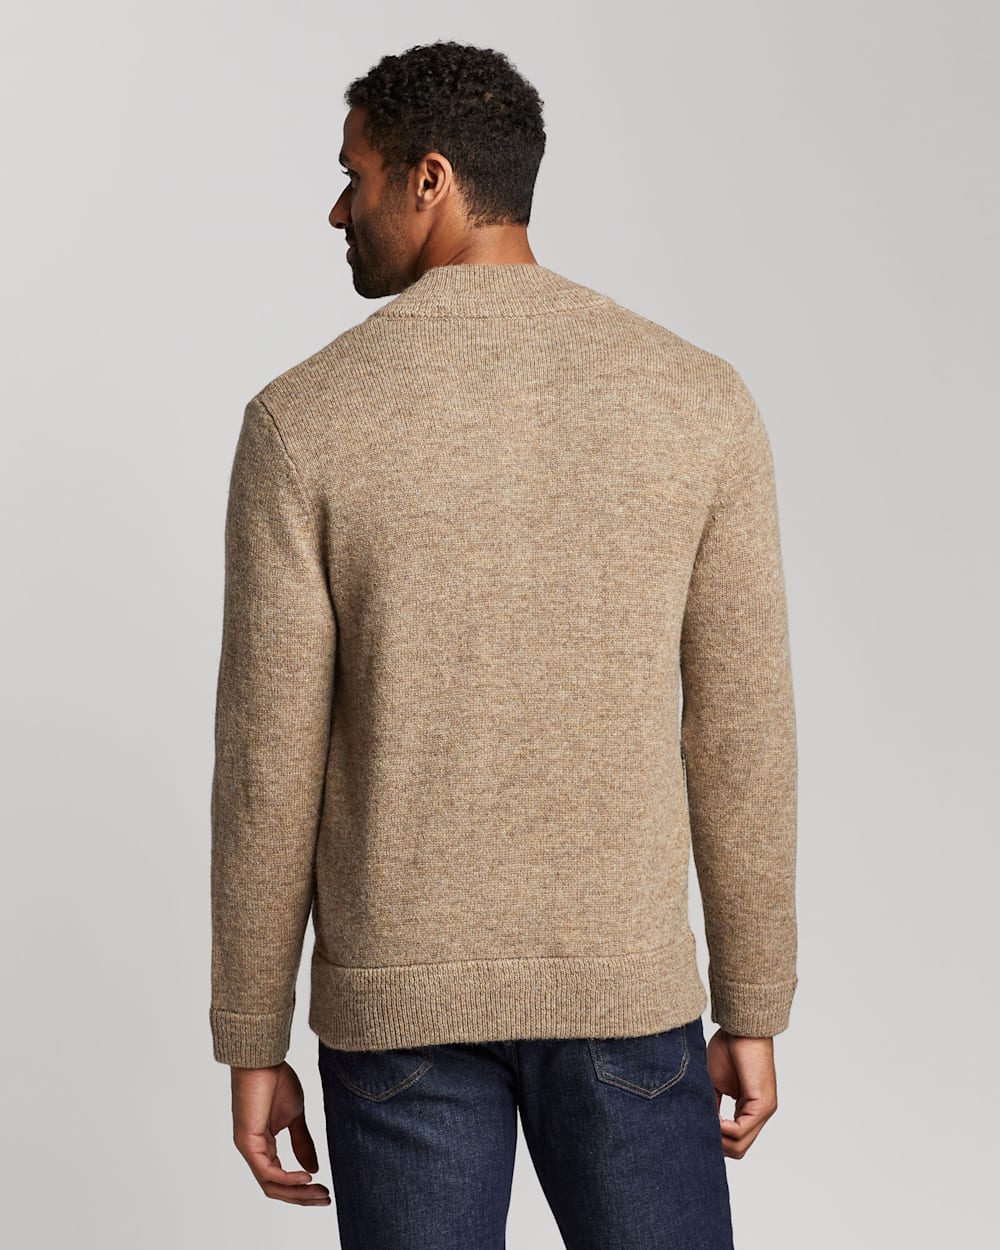 ALTERNATE VIEW OF MEN'S SHETLAND WASHABLE WOOL CARDIGAN IN COYOTE TAN HEATHER image number 3